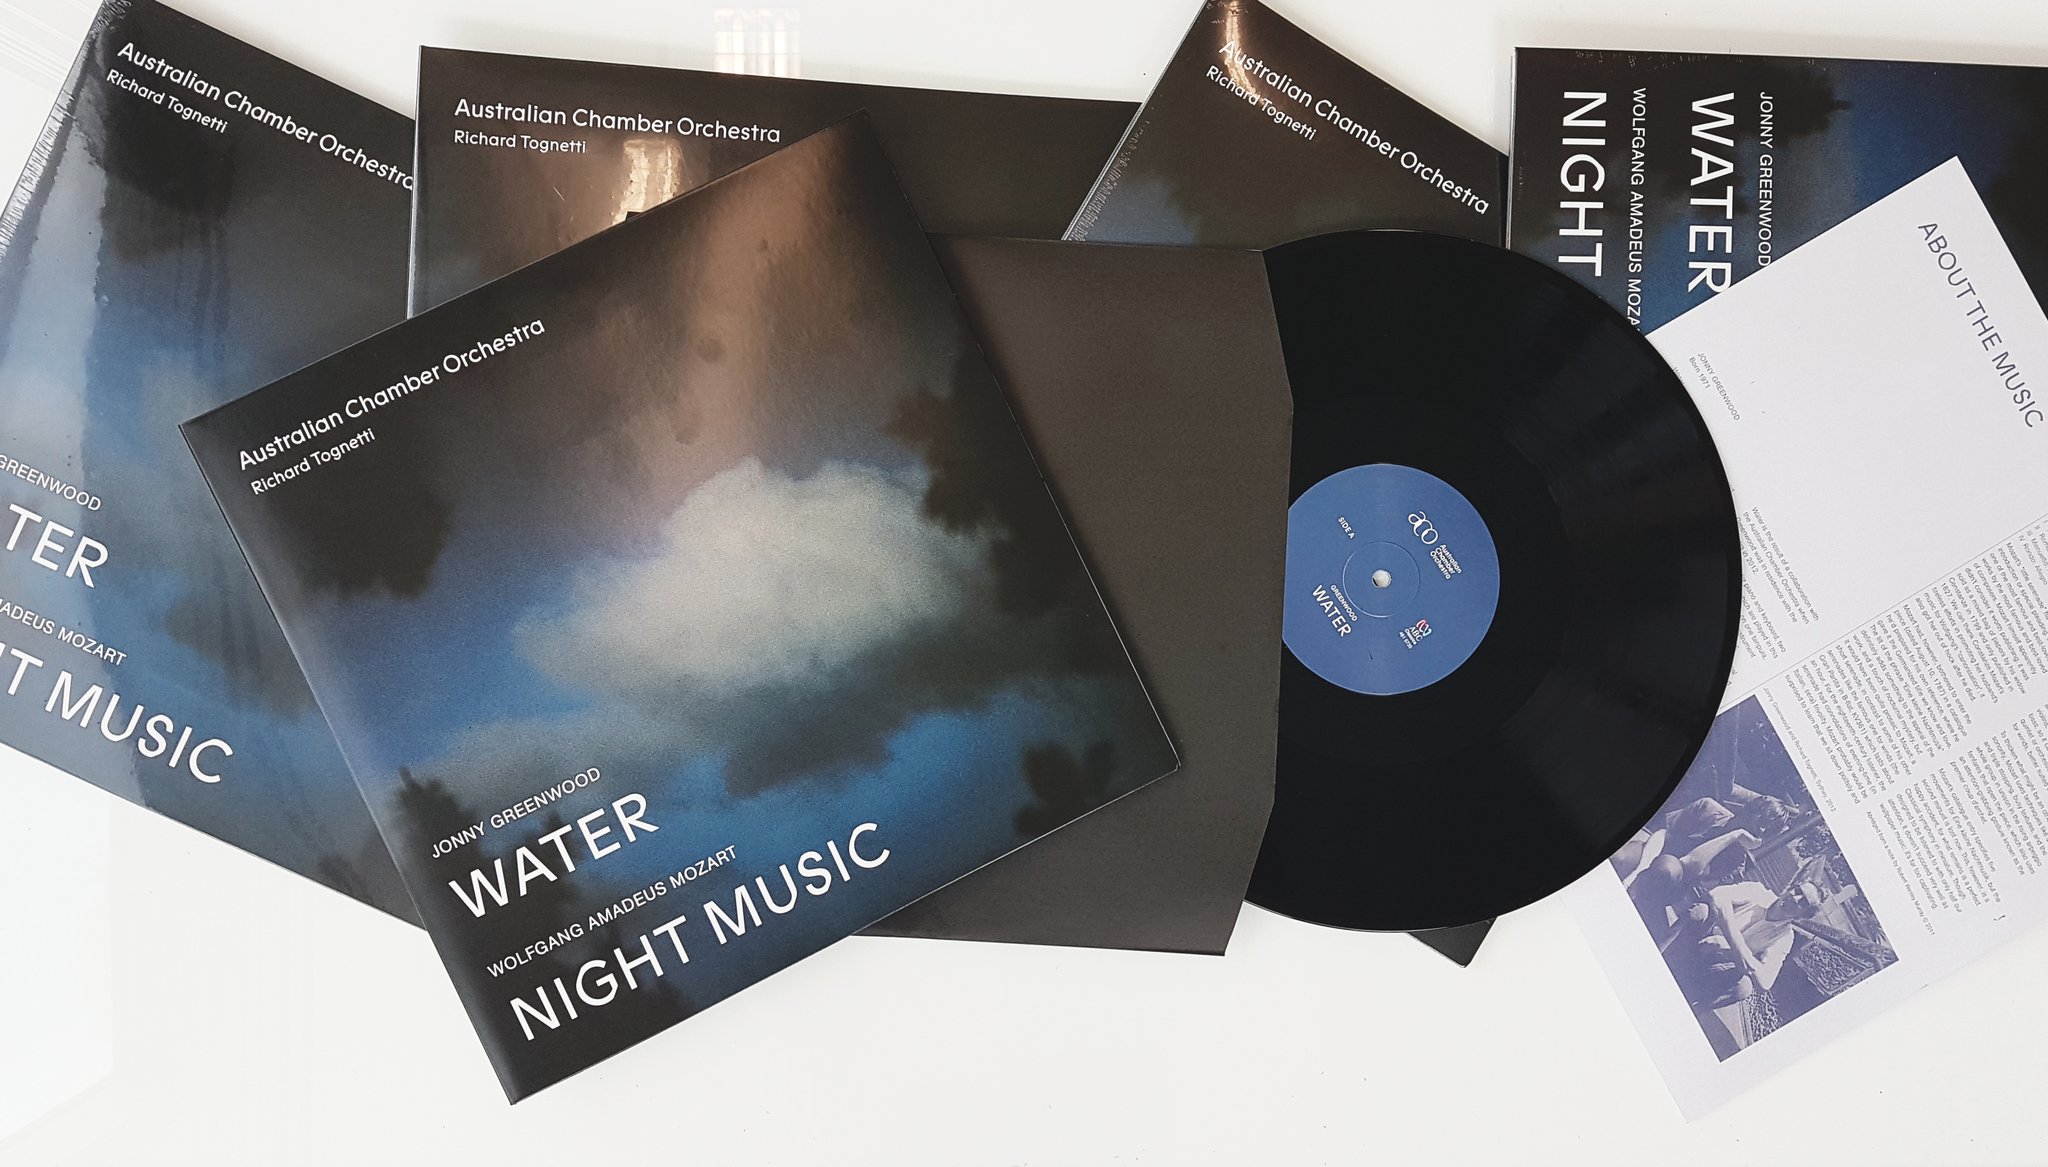 How the Australian Chamber Orchestra came to release a vinyl record with Radiohead’s Jonny Greenwood